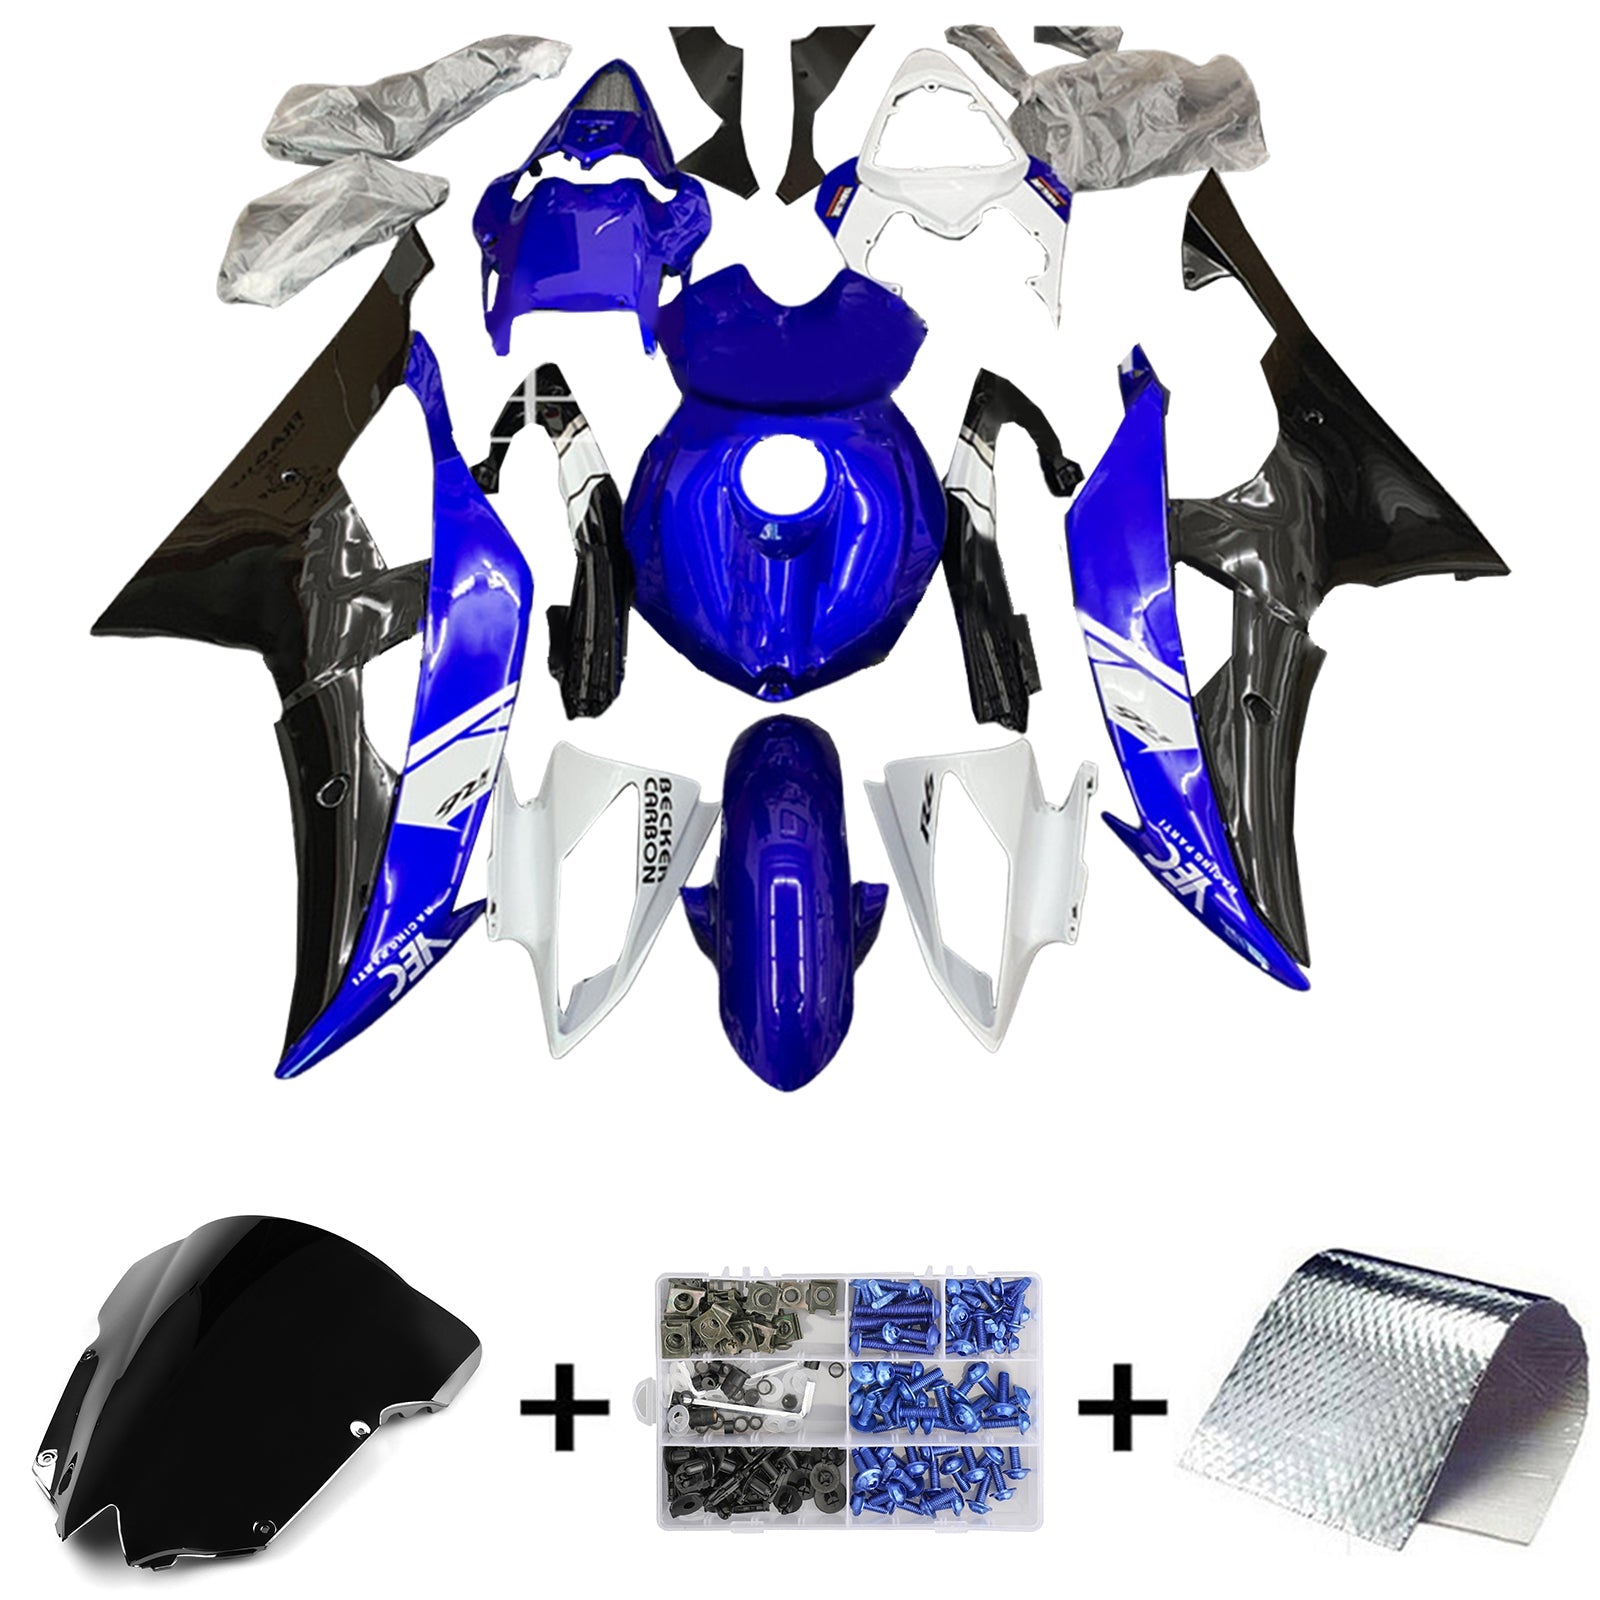 Amotopart Kit carena carrozzeria in plastica ABS per Yamaha YZF 600 R6 2008-2016